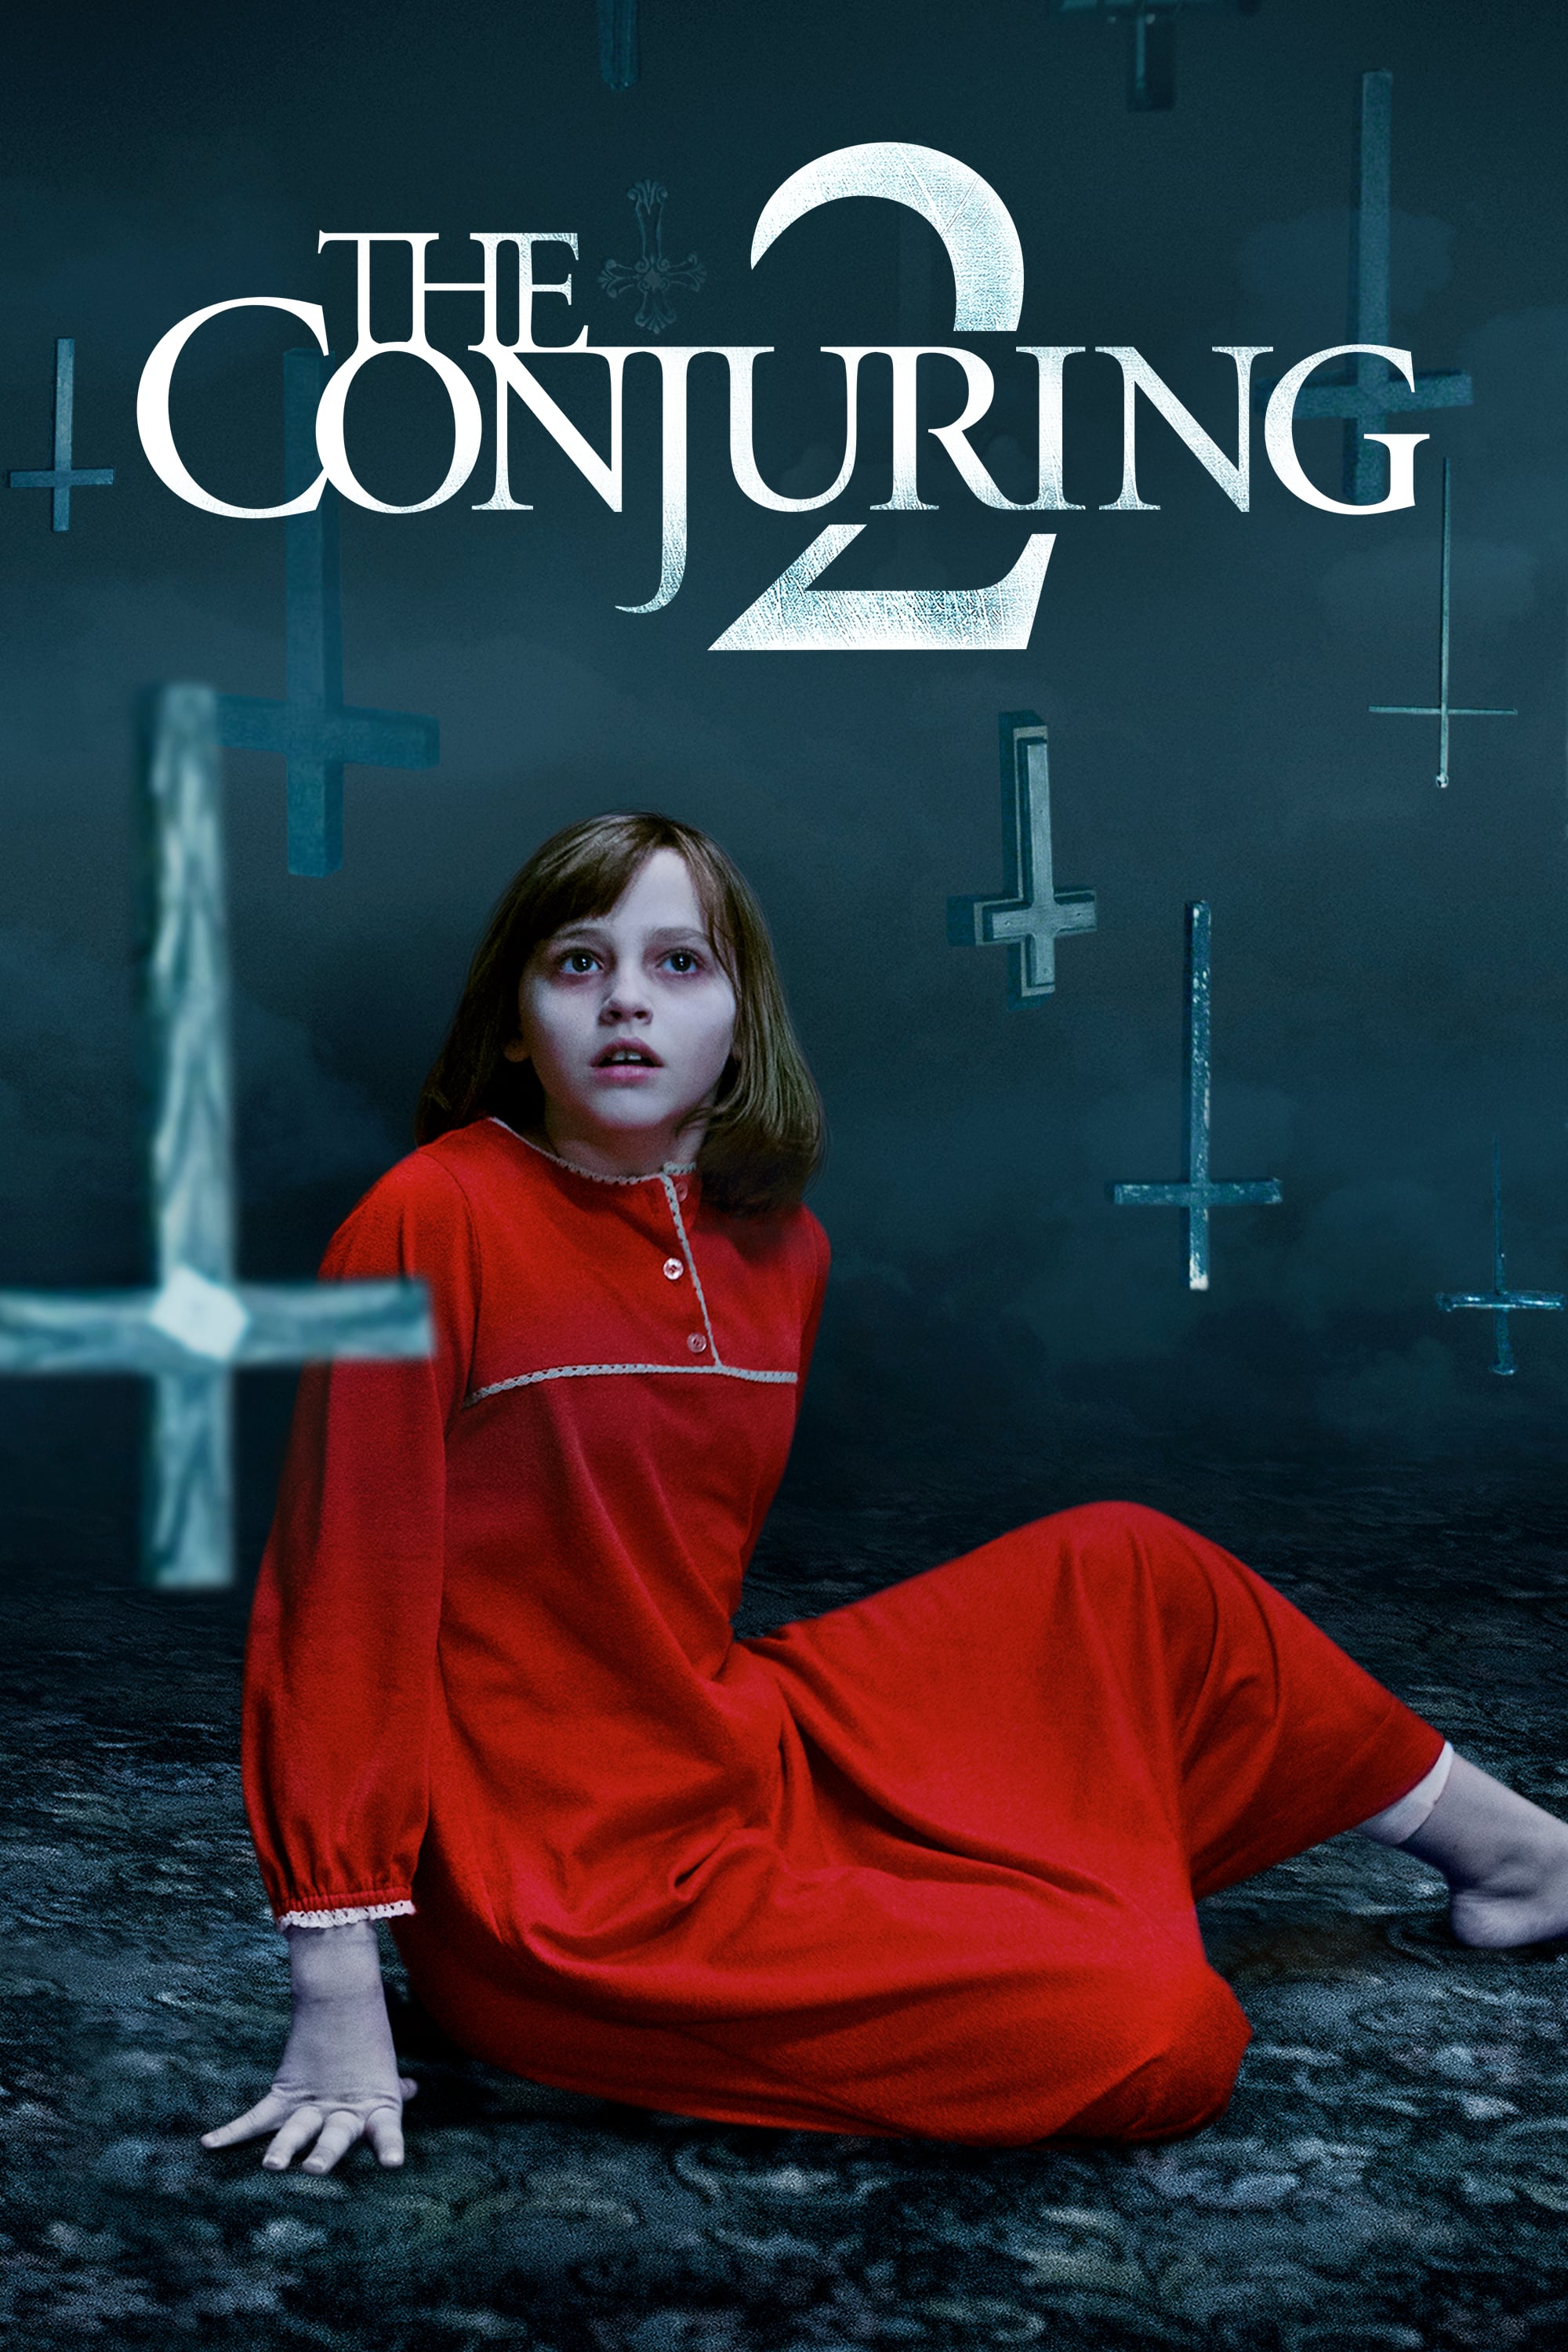 conjuring 1 full movie download in hindi